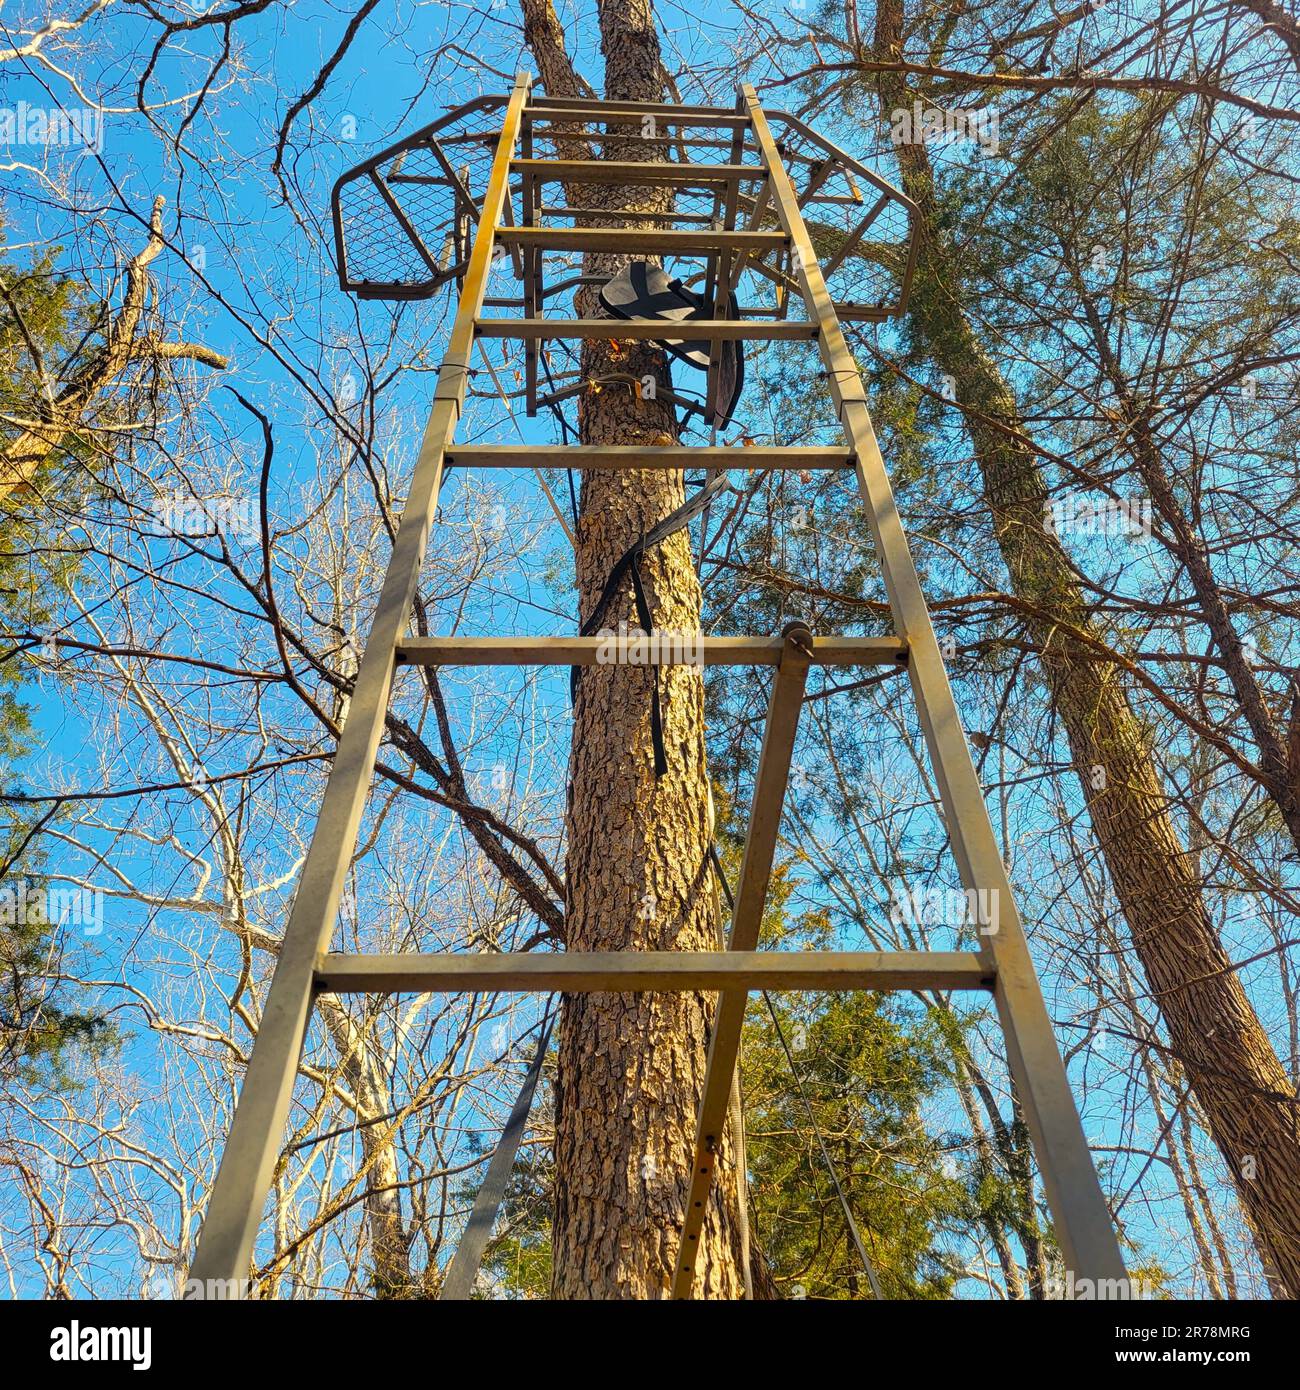 A metal, ladder style deer stand is set up on a tree in the woods. Stock Photo